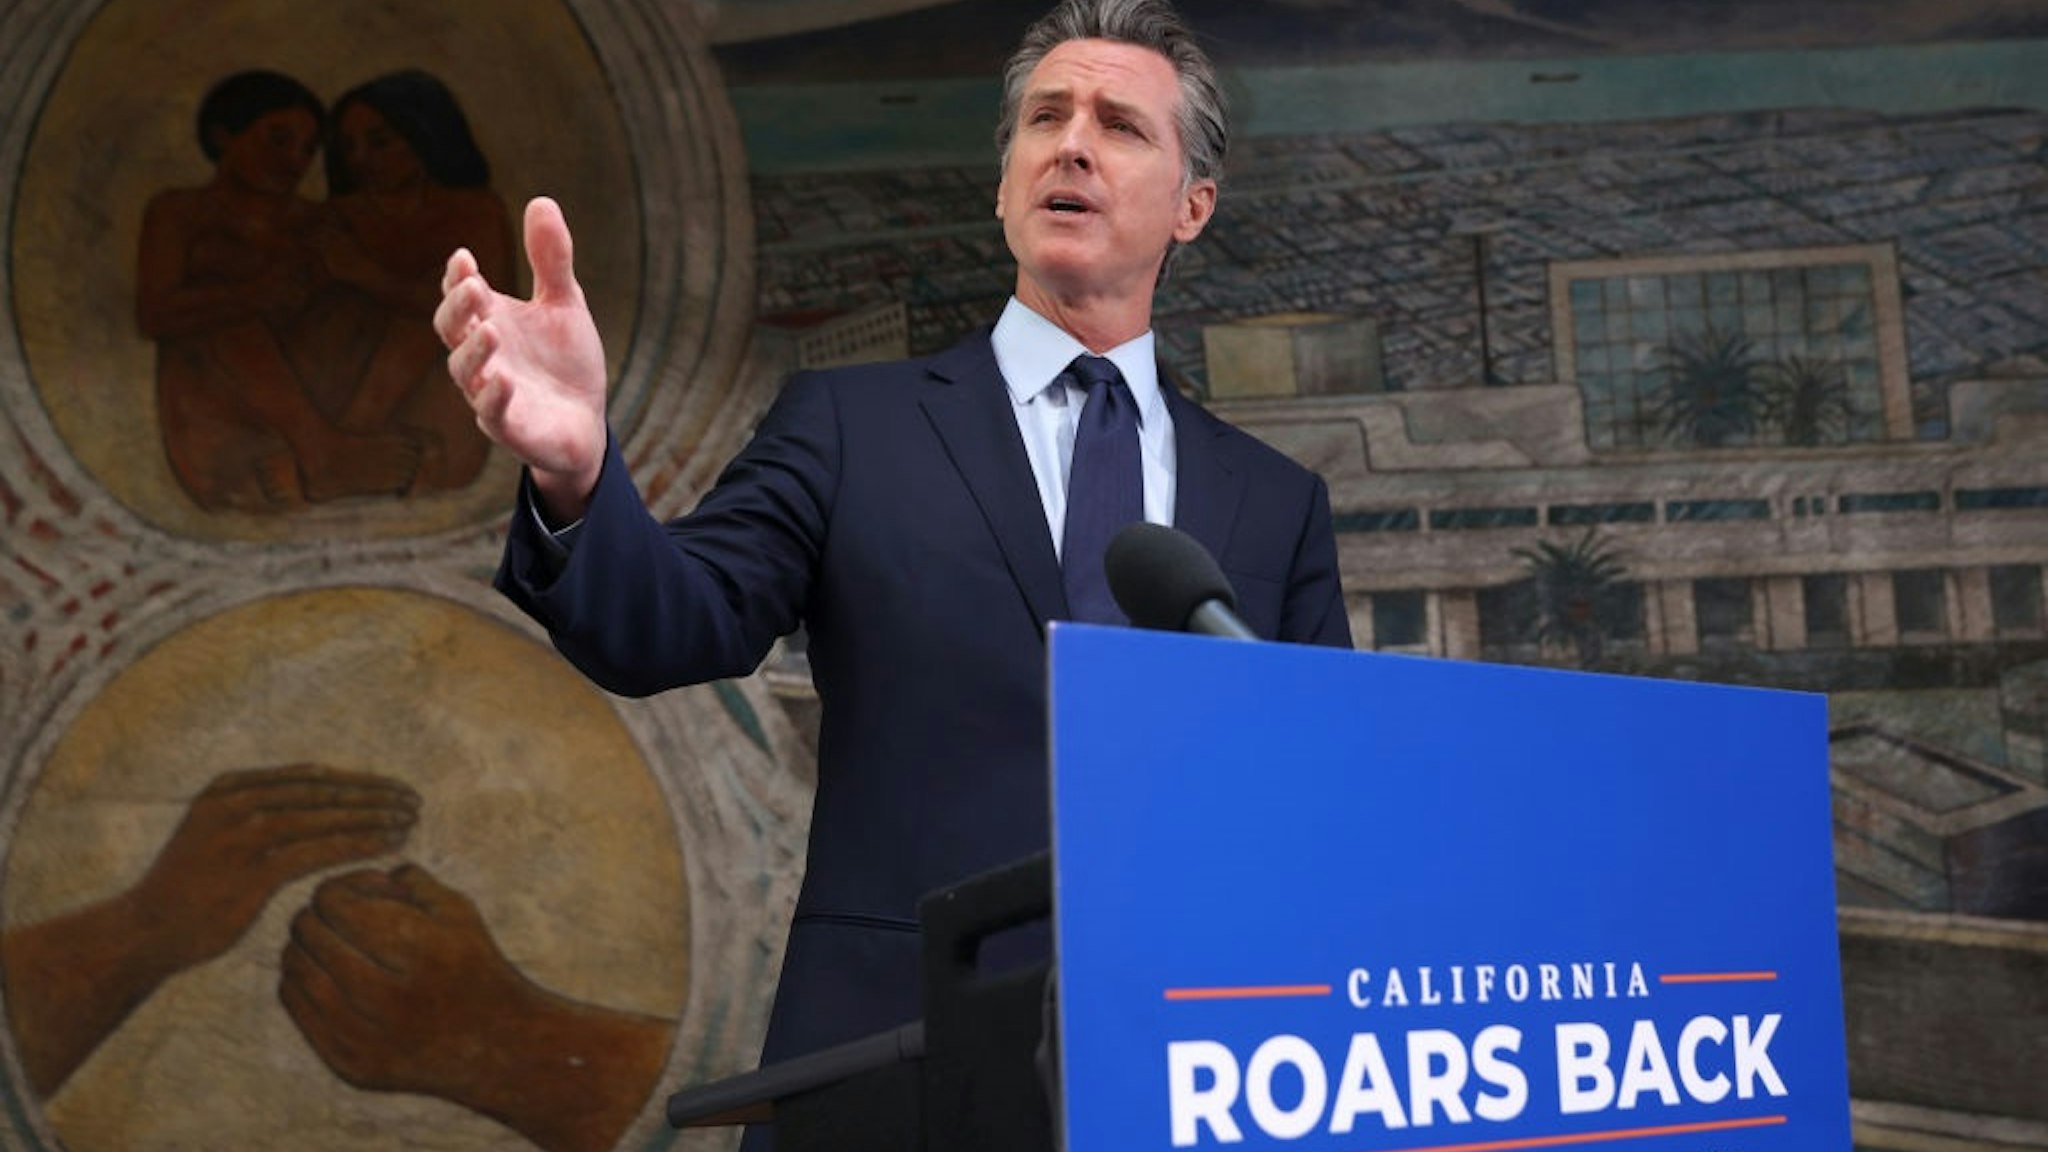 OAKLAND, CALIFORNIA - MAY 10: California Gov. Gavin Newsom speaks during a press conference at The Unity Council on May 10, 2021 in Oakland, California.